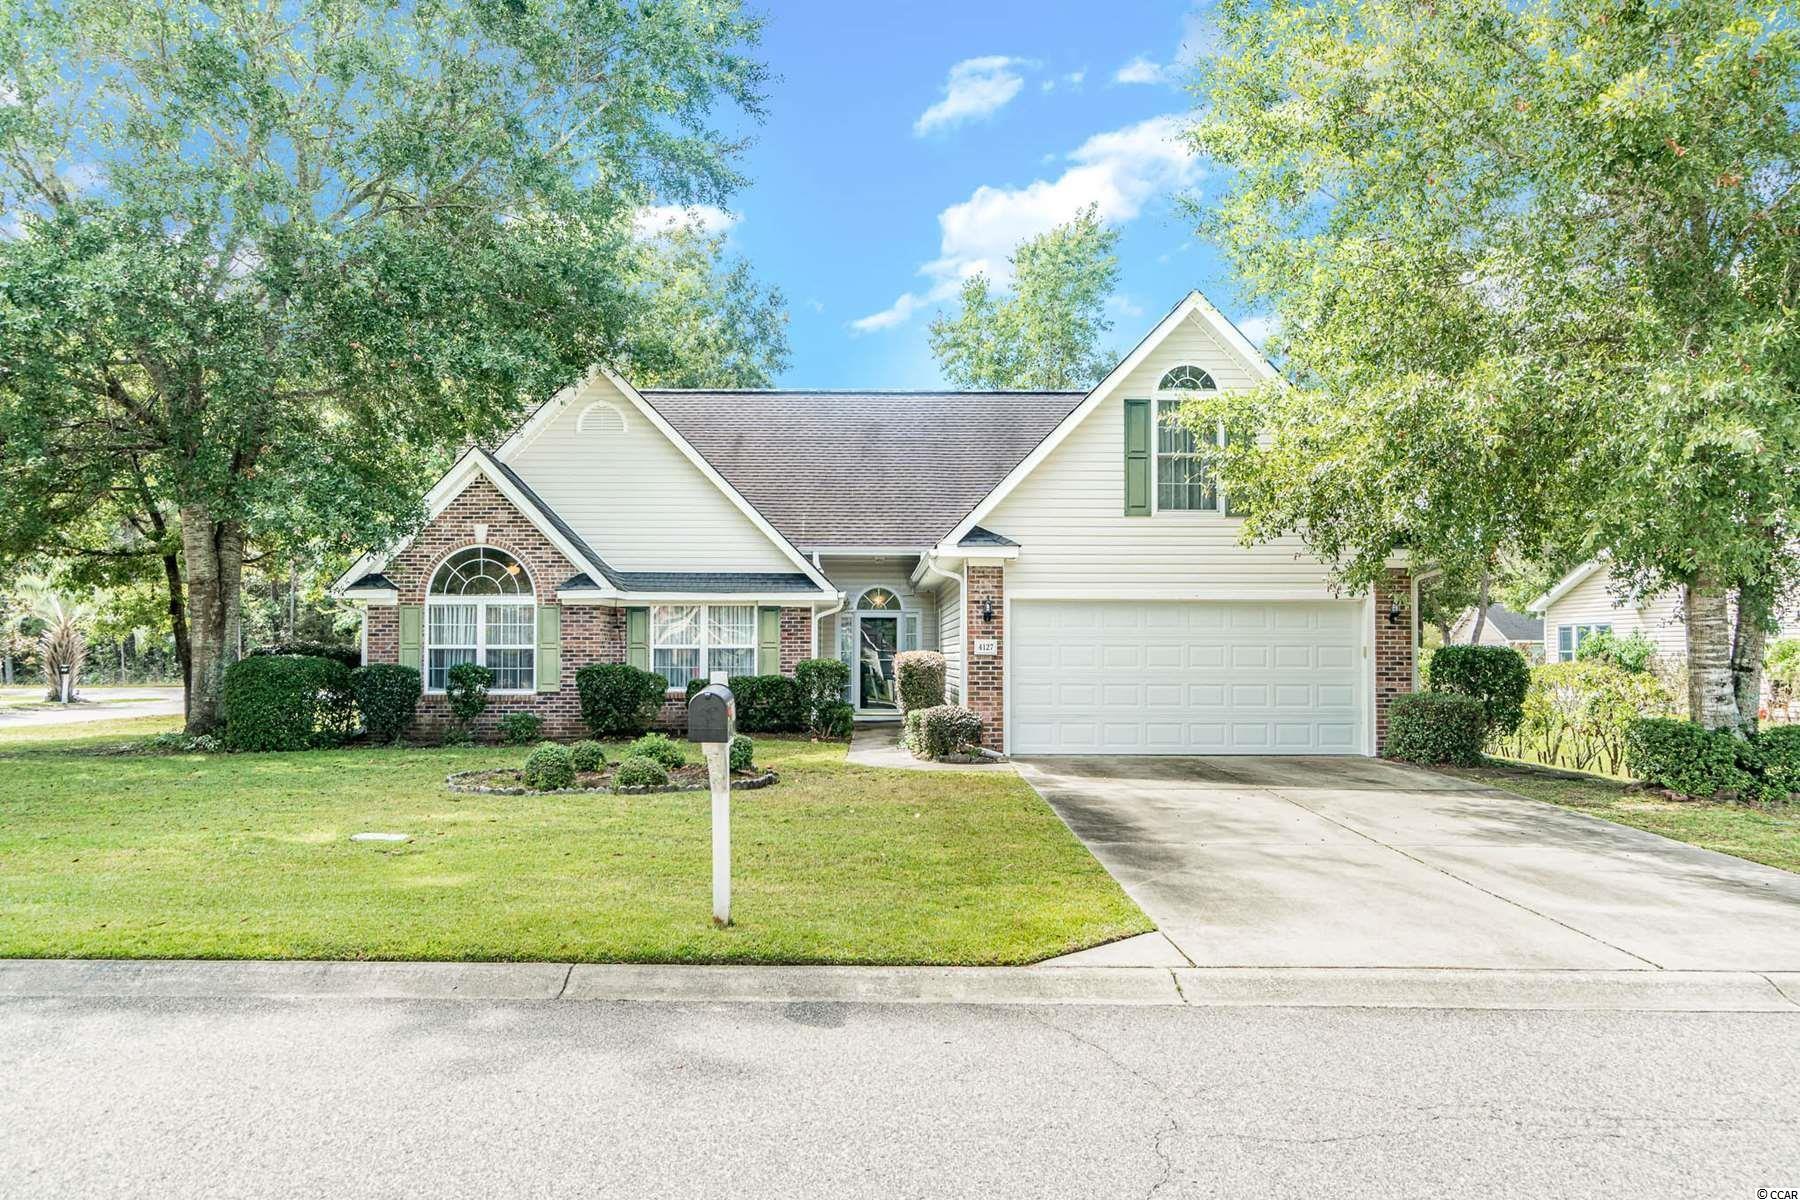 4127 Steeple Chase Dr. Myrtle Beach, SC 29588